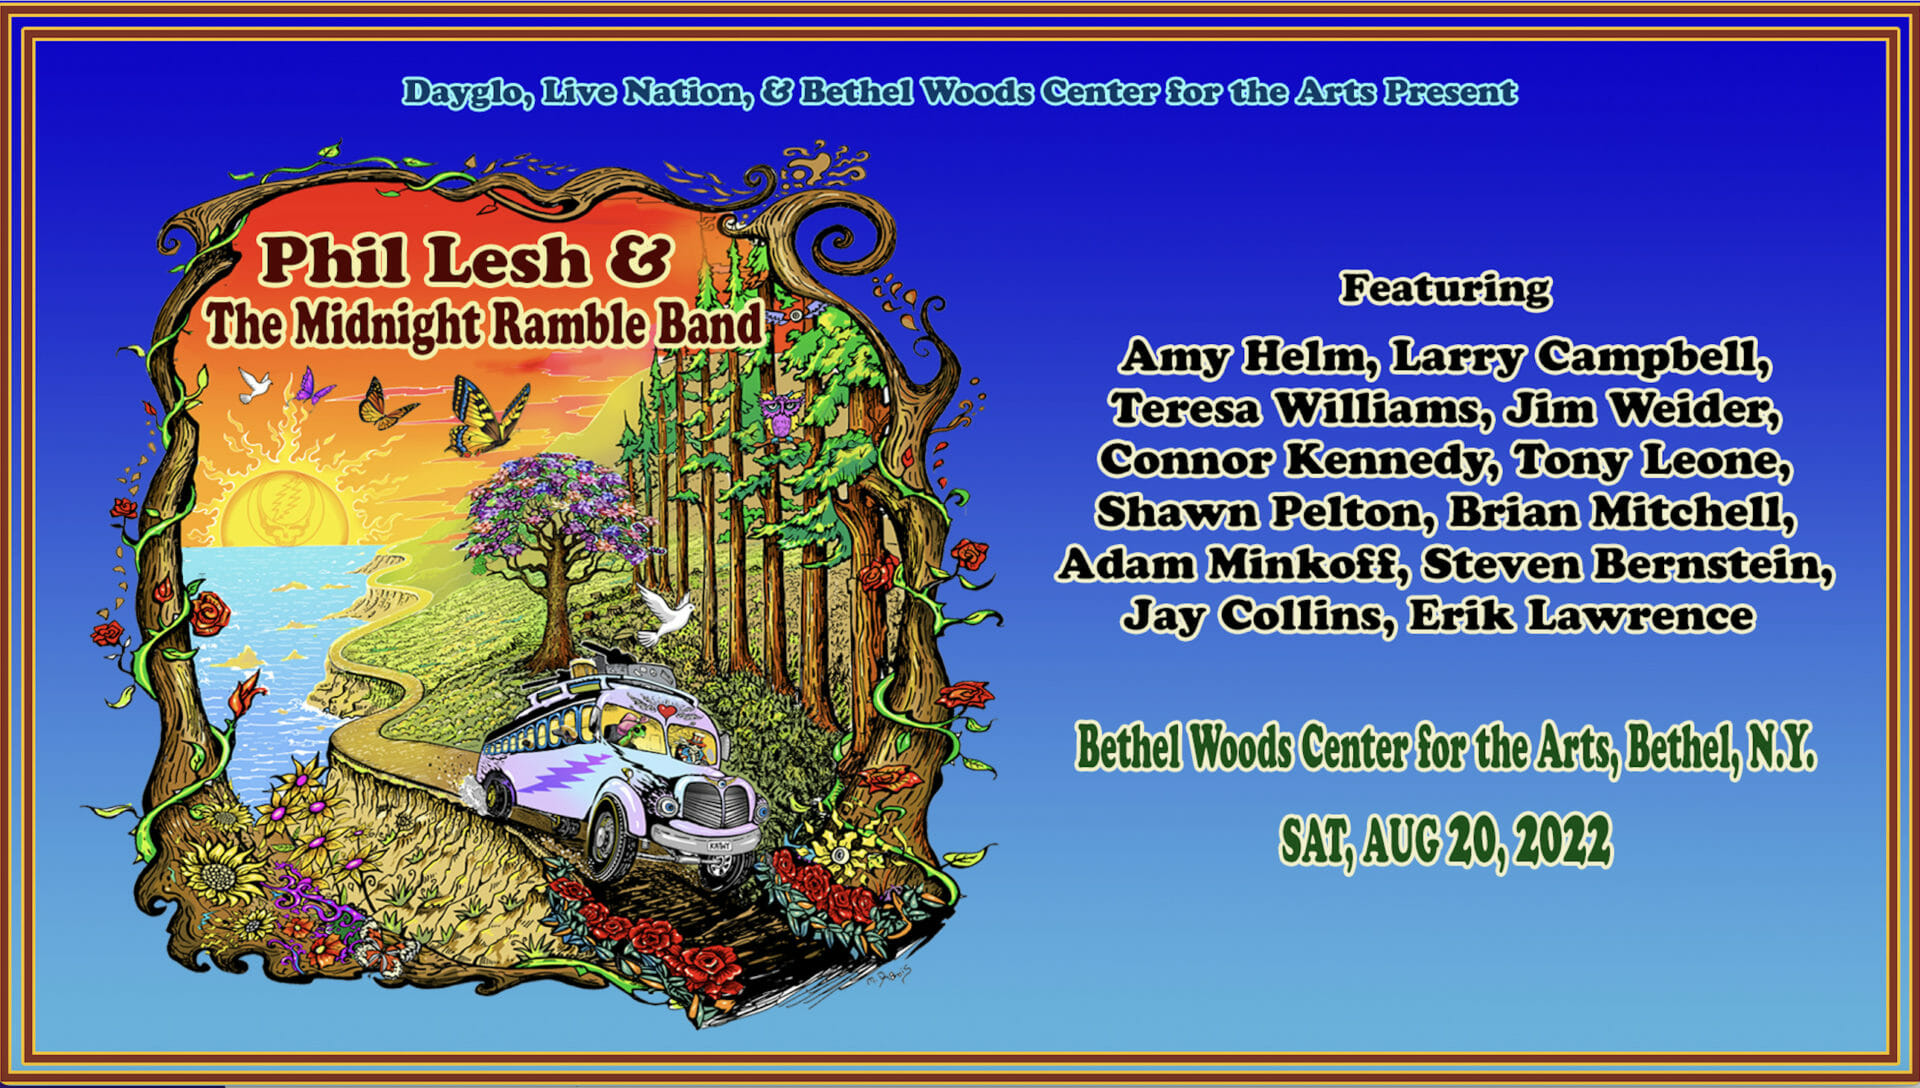 Phil Lesh & The Midnight Ramble Band Announce Performance at Bethel Woods